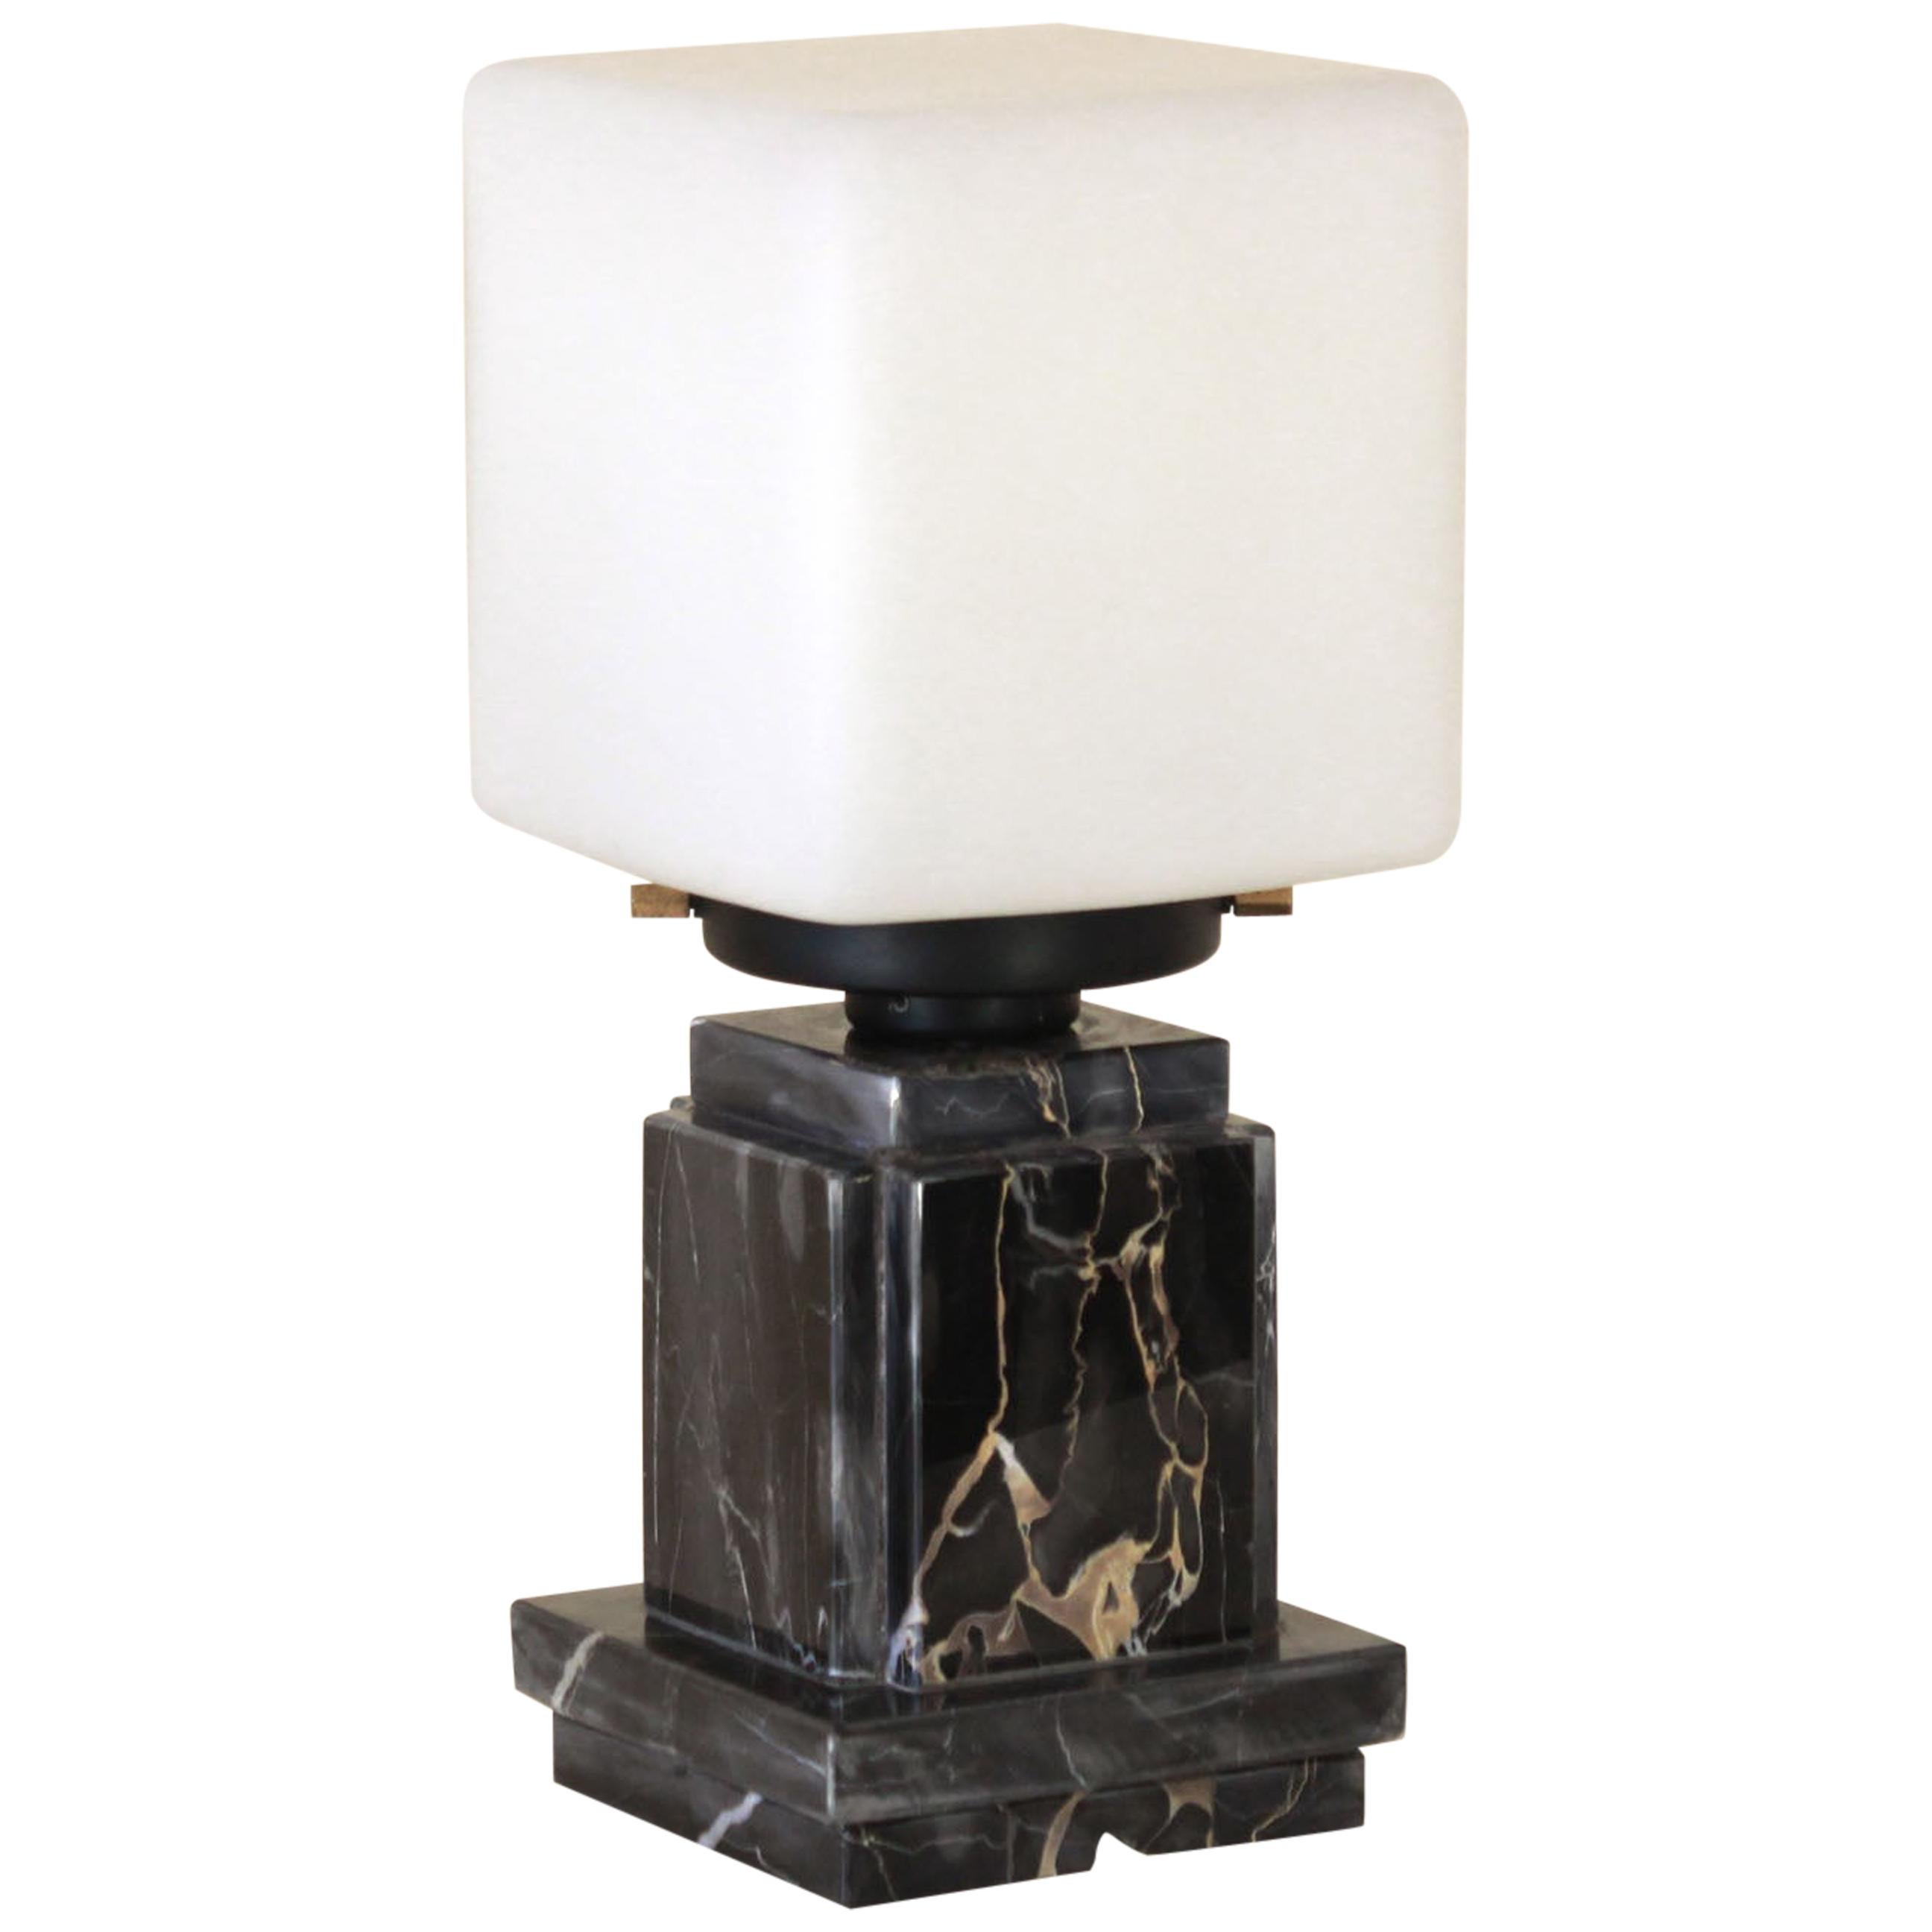 Vintage marble and gold Table Lamp from the 1970s